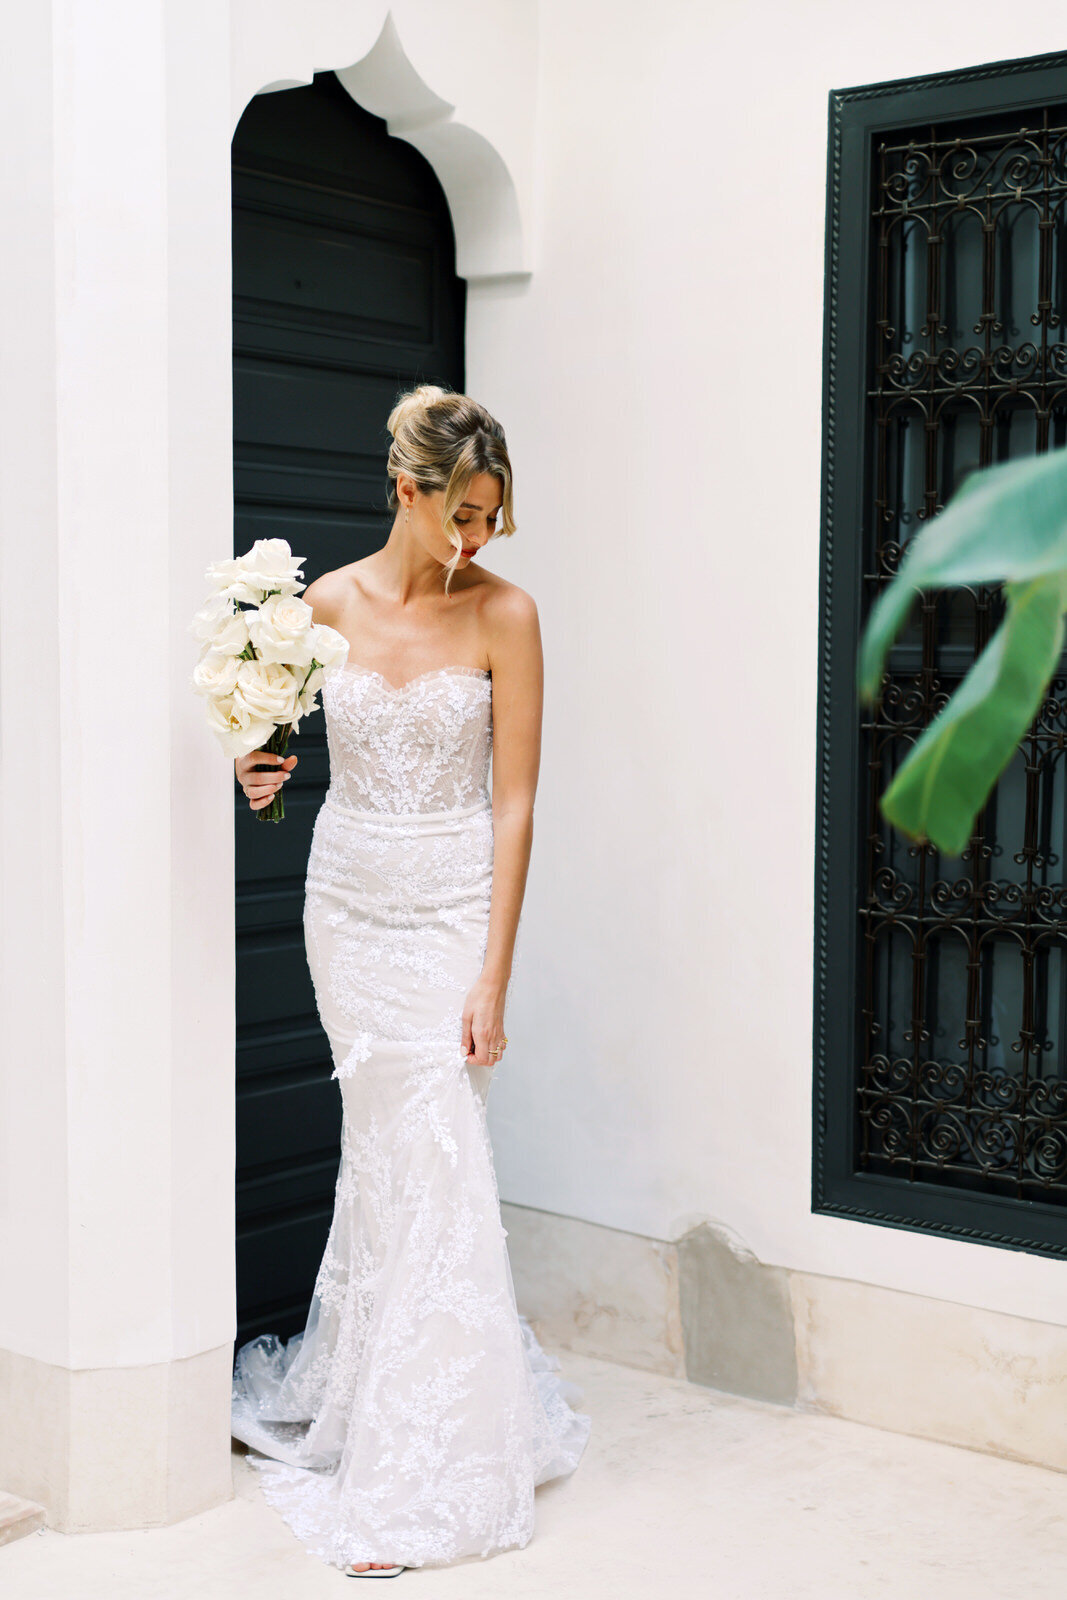 Stylish Elopement Photography in Marrakech 20